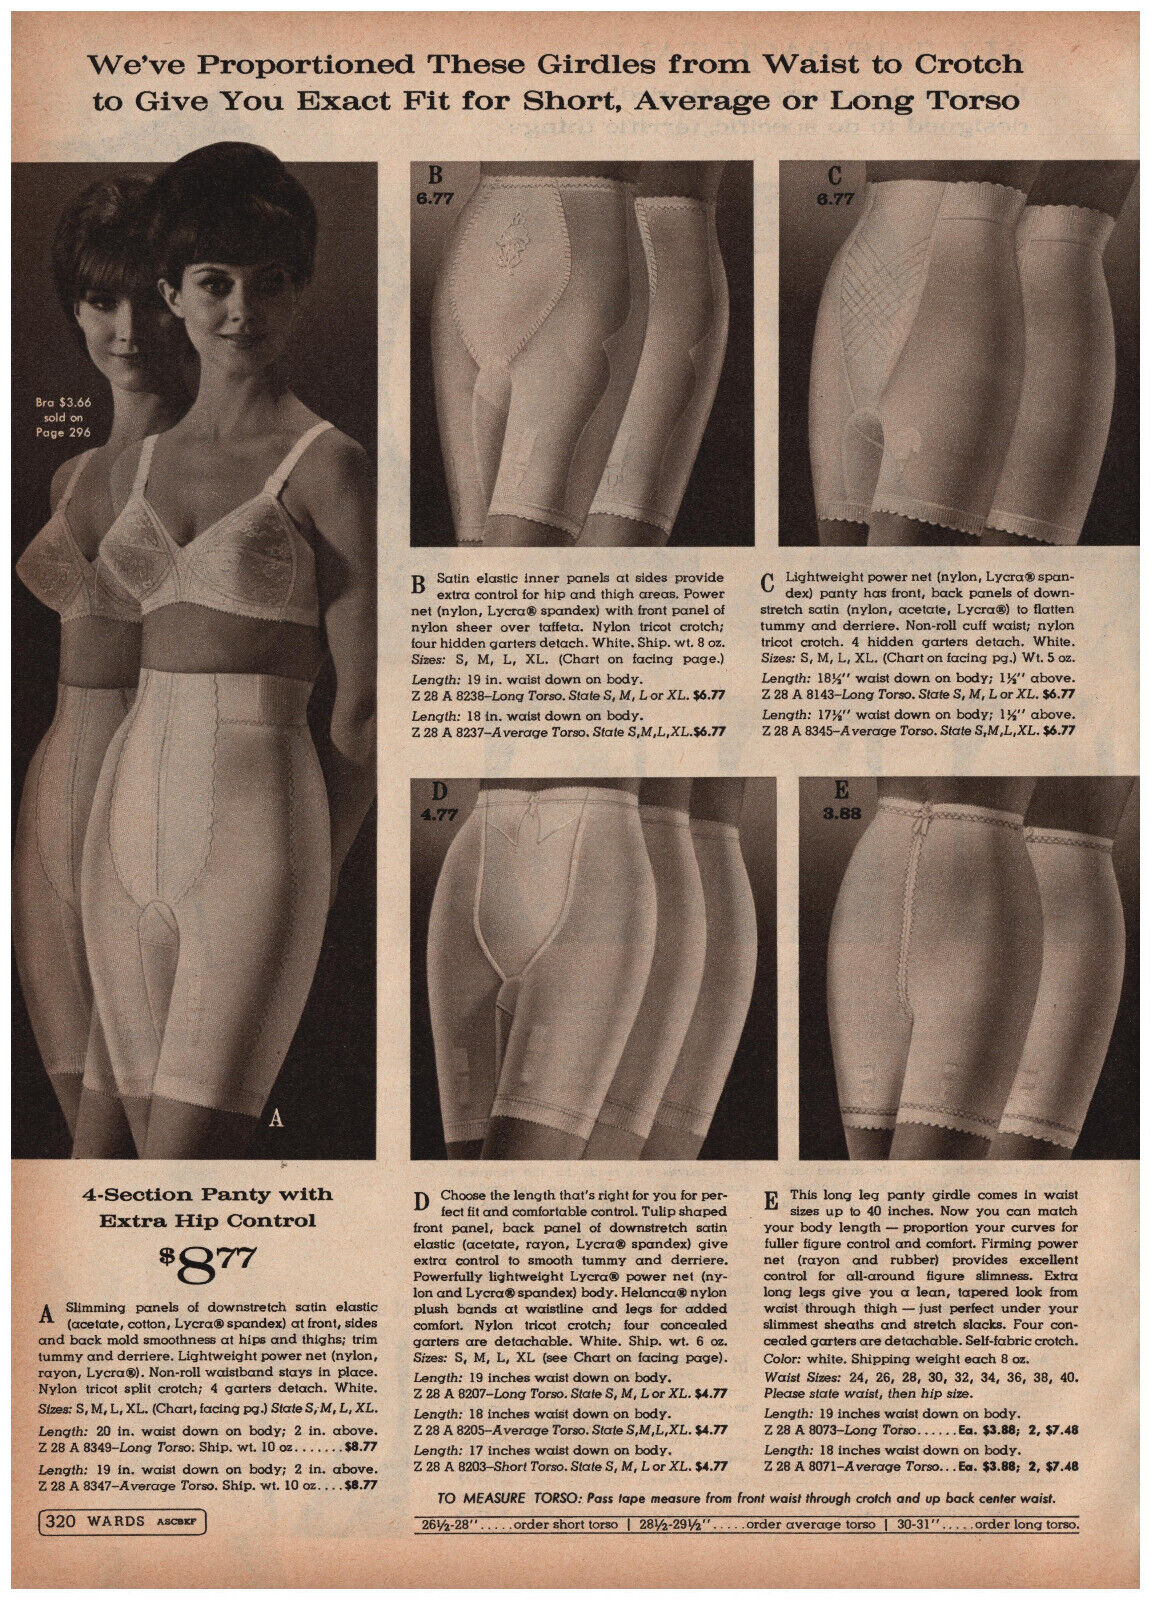 1965 Montgomery Ward Print AD Girdle 4 Section Panty Waist to Crotch